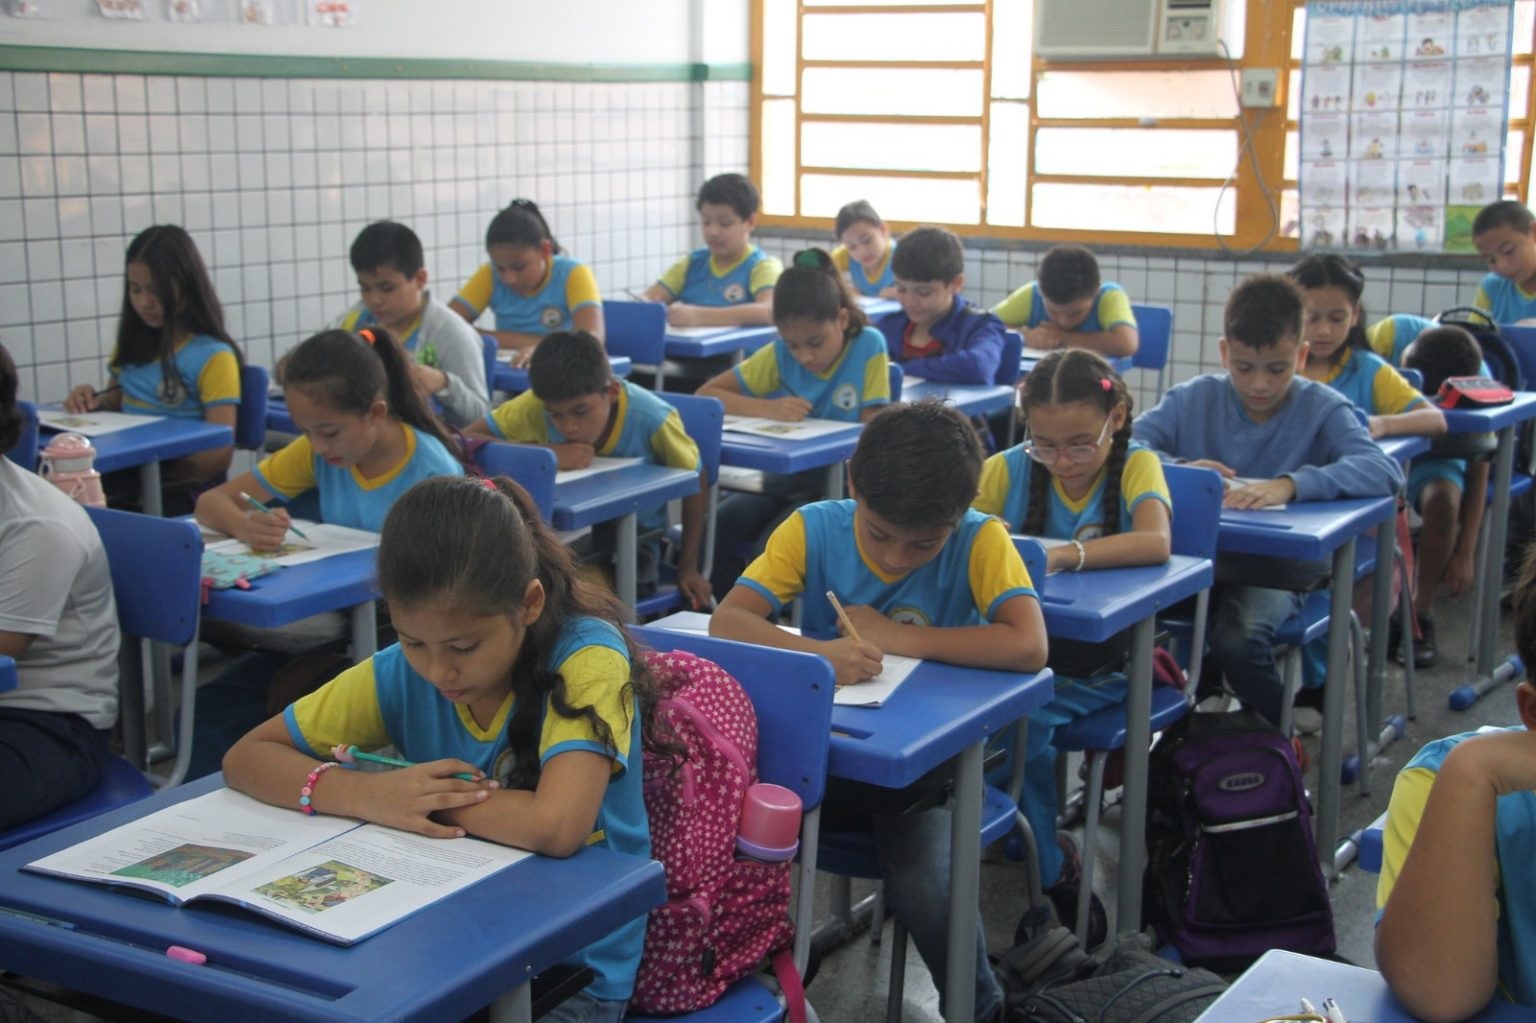 Manaus increases literacy, reaching 96% in the 3rd year of elementary school